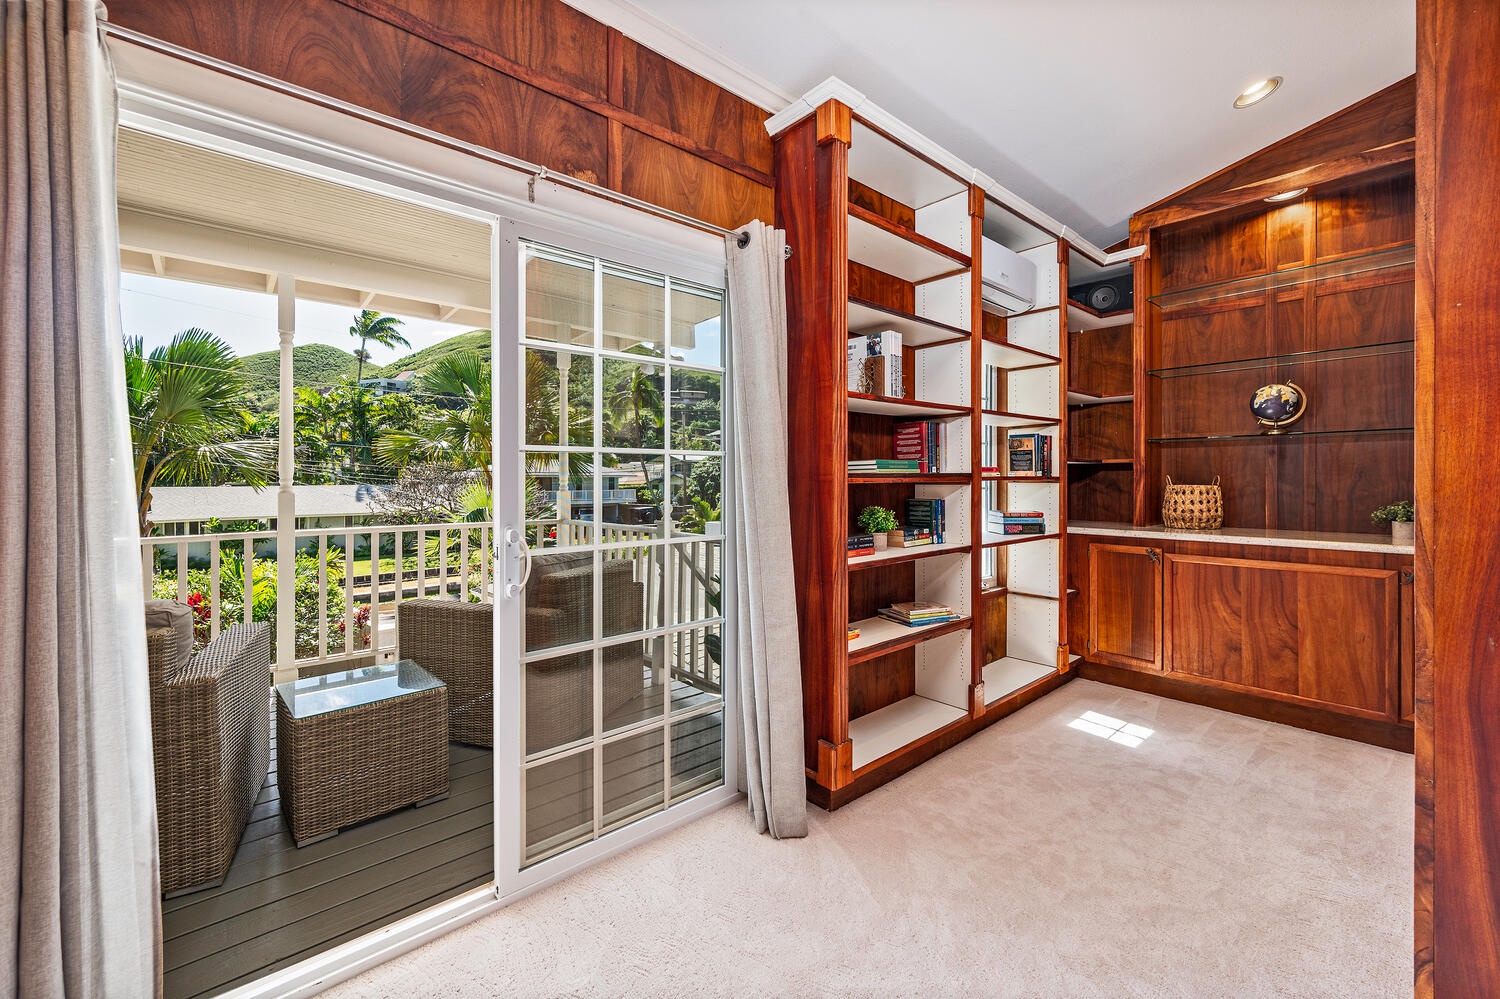 Kailua Vacation Rentals, Villa Hui Hou - Library/Study with shared covered lanai with the Primary